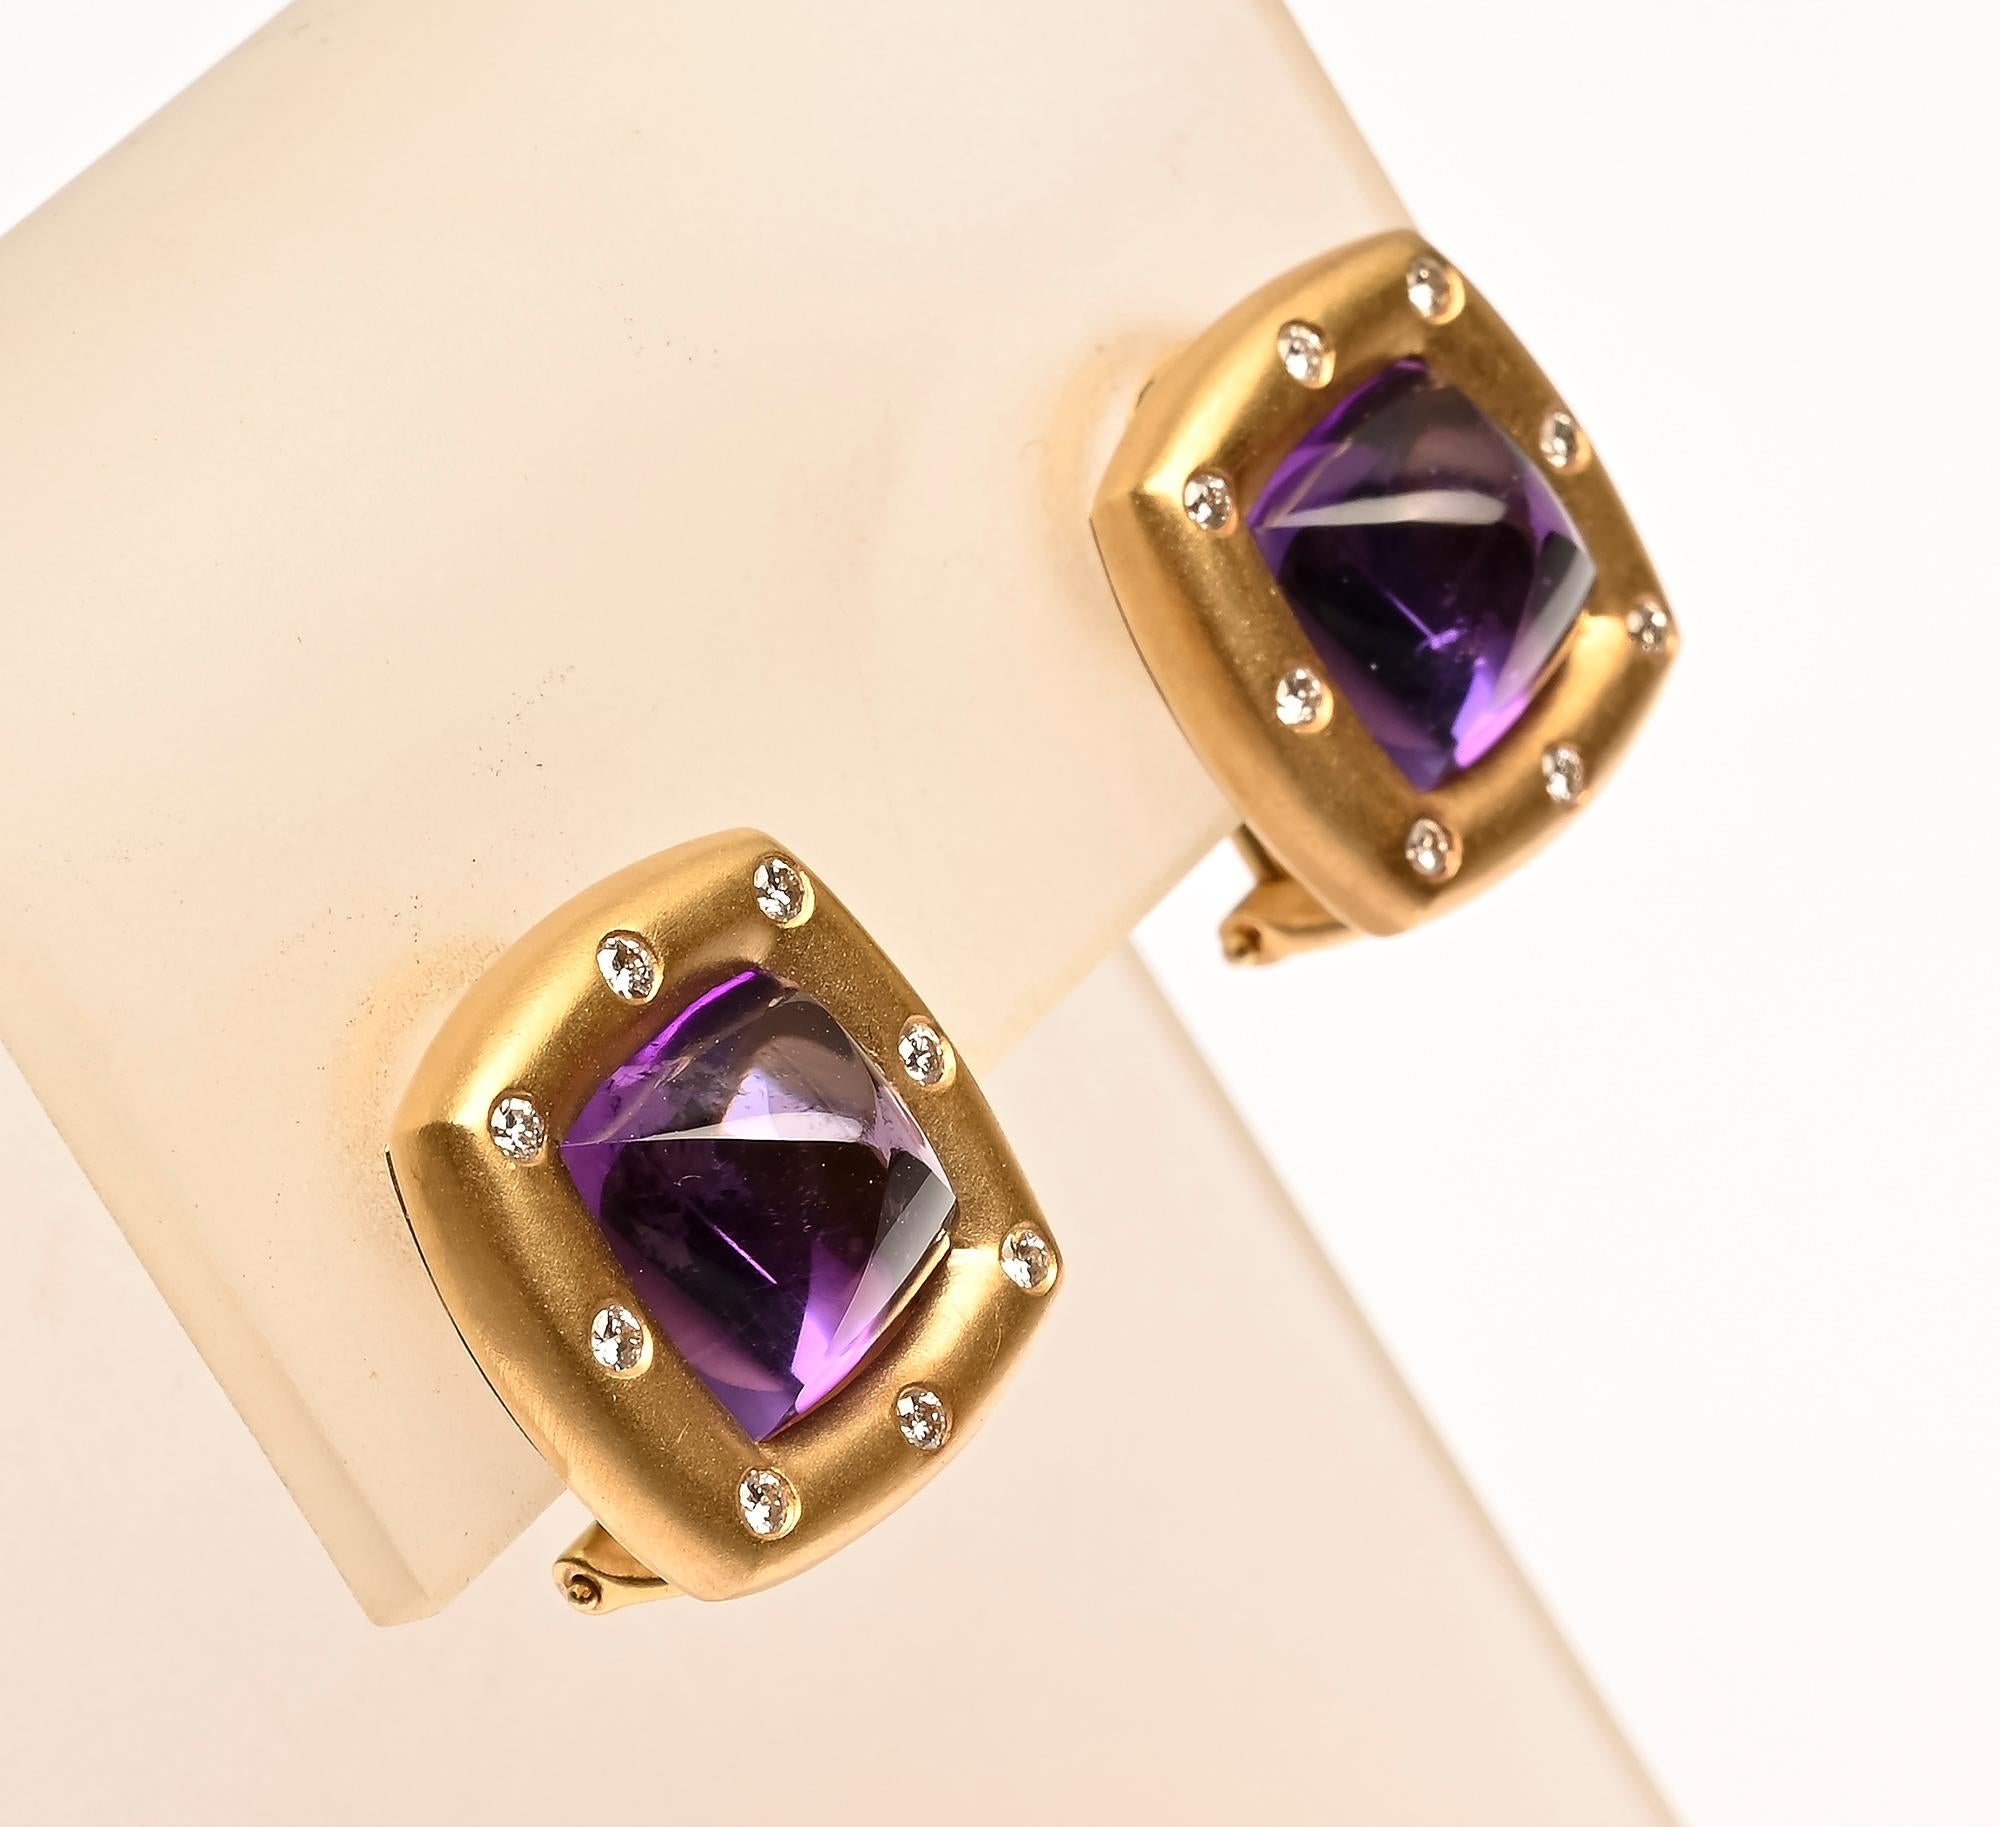 Tailored amethyst earrings by H. Stern with a hint of sparkle. Eight small diamonds surround the sugarloaf cut amethyst center.
Backs are clips and posts. Measurements are 5/8 inches square.